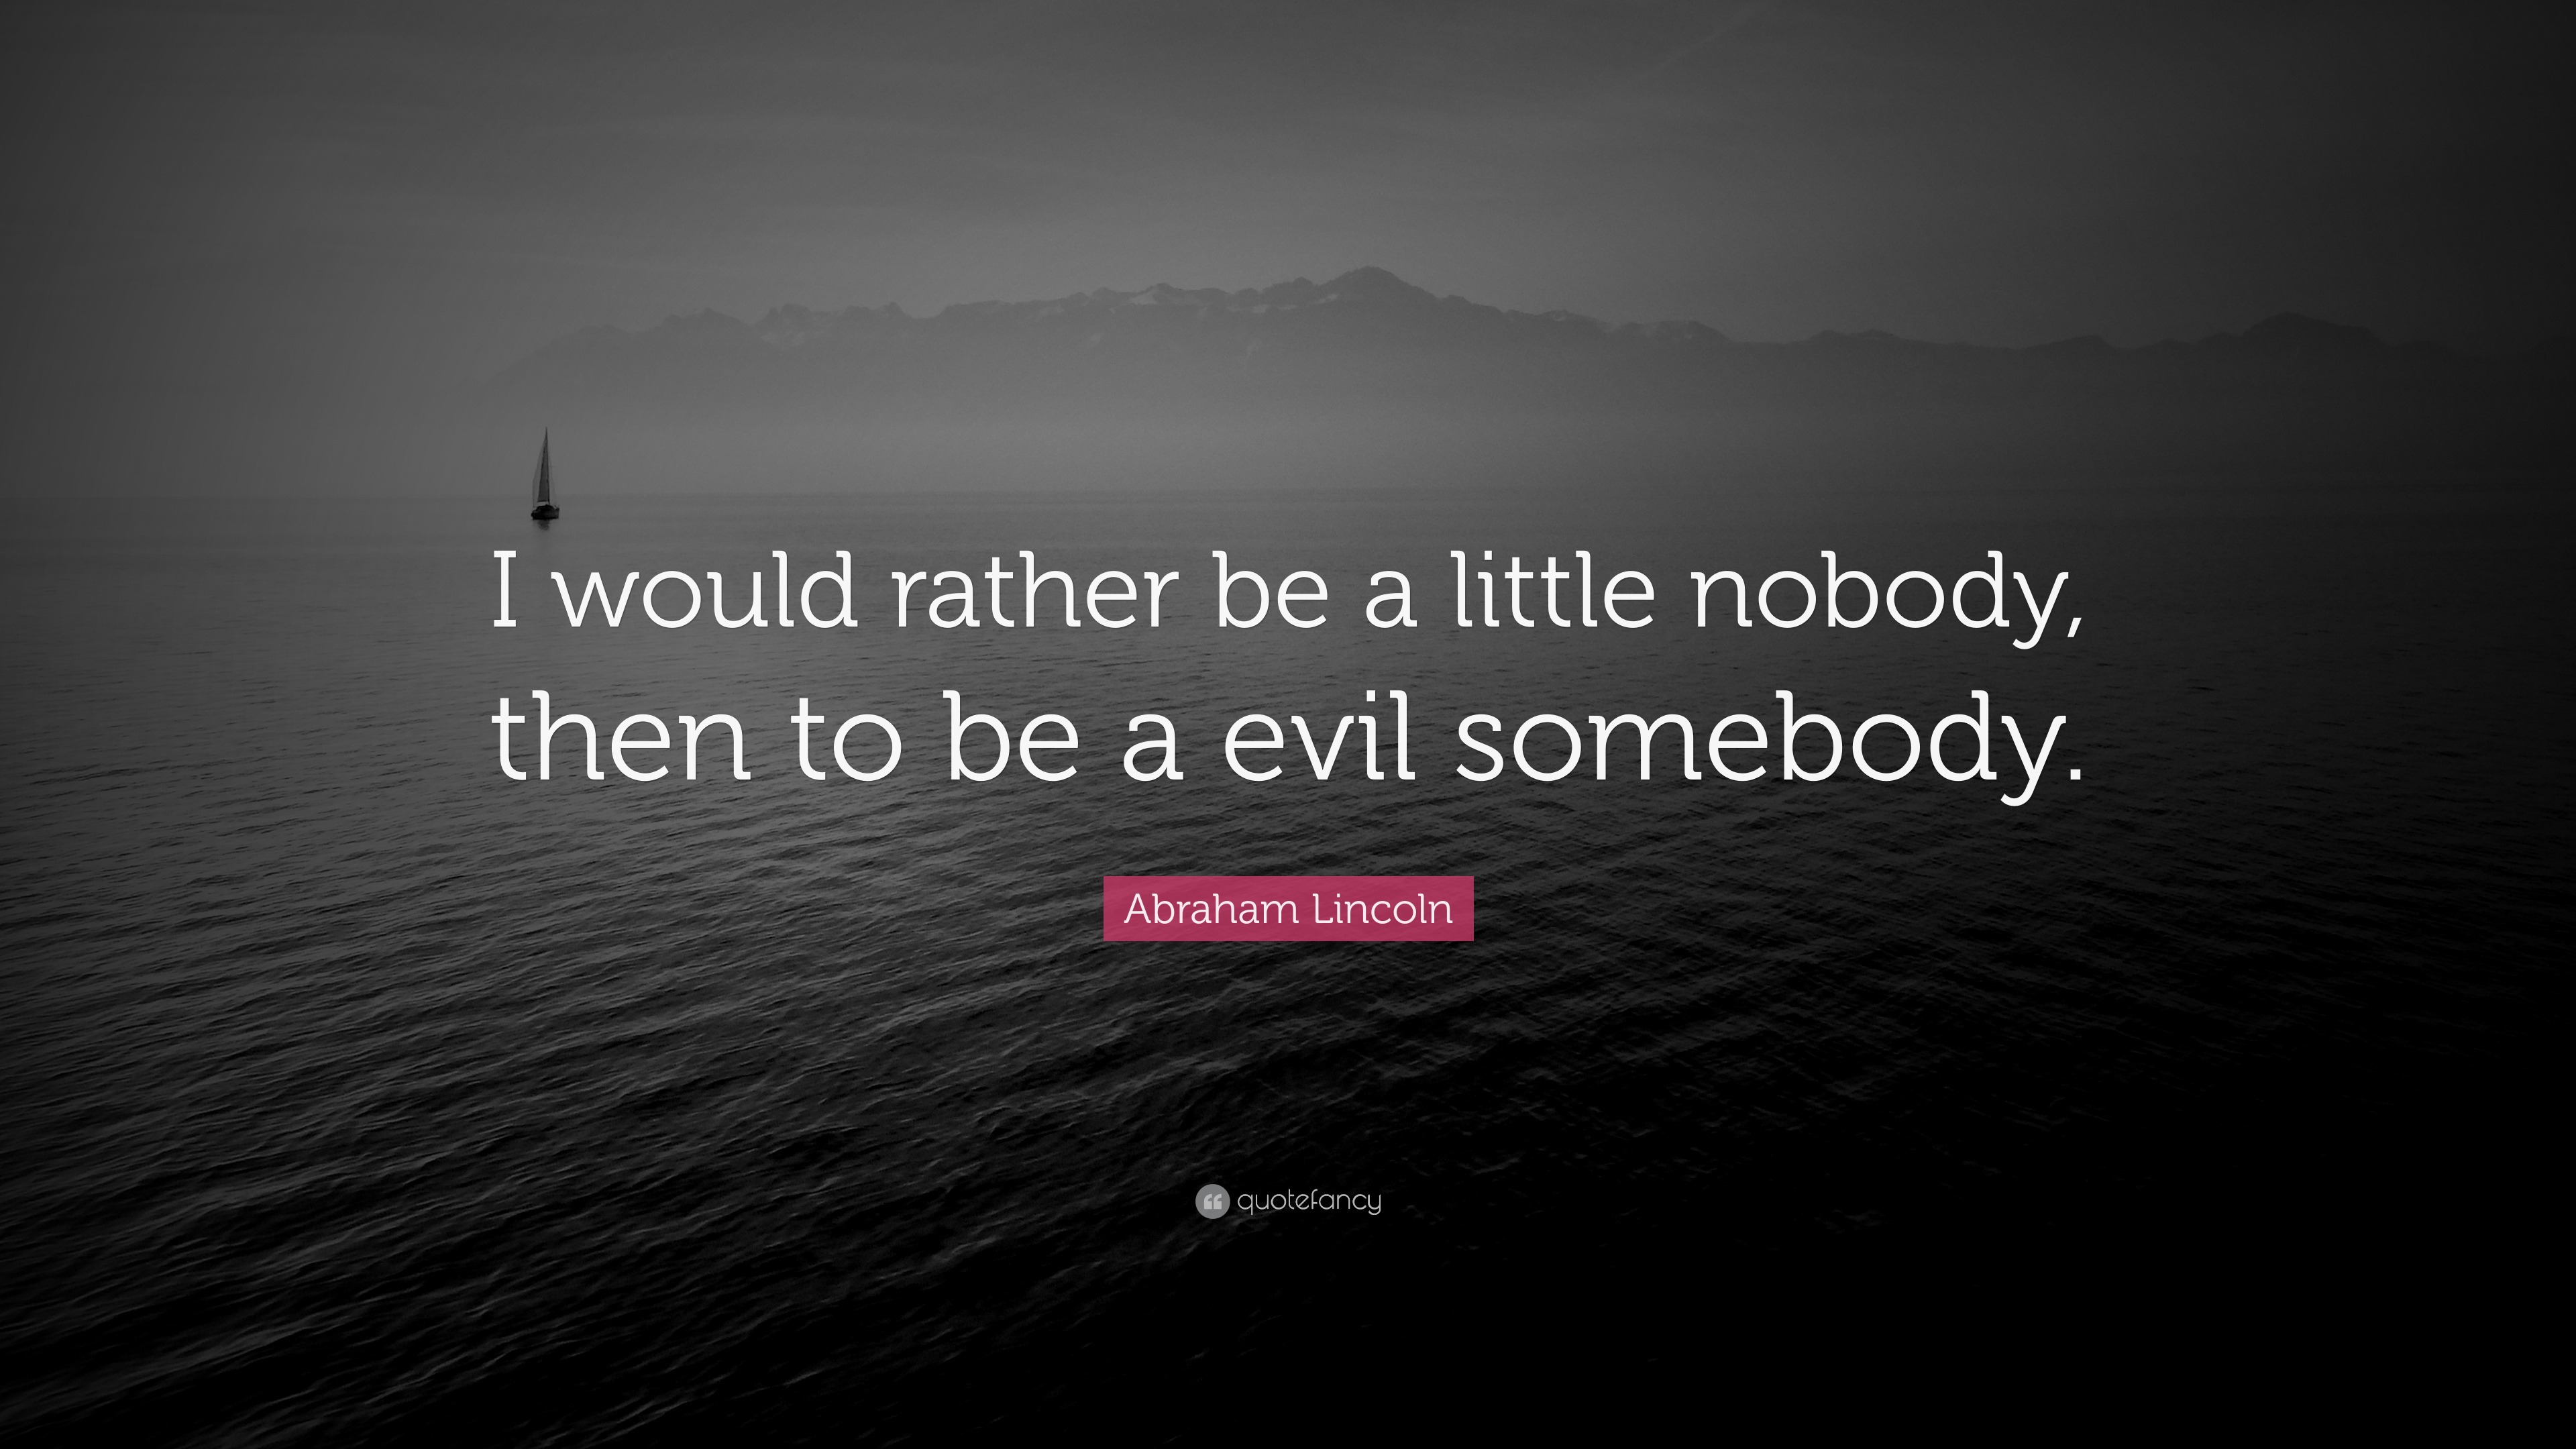 Abraham Lincoln Quote: “I would rather be a little nobody, then to be a ...